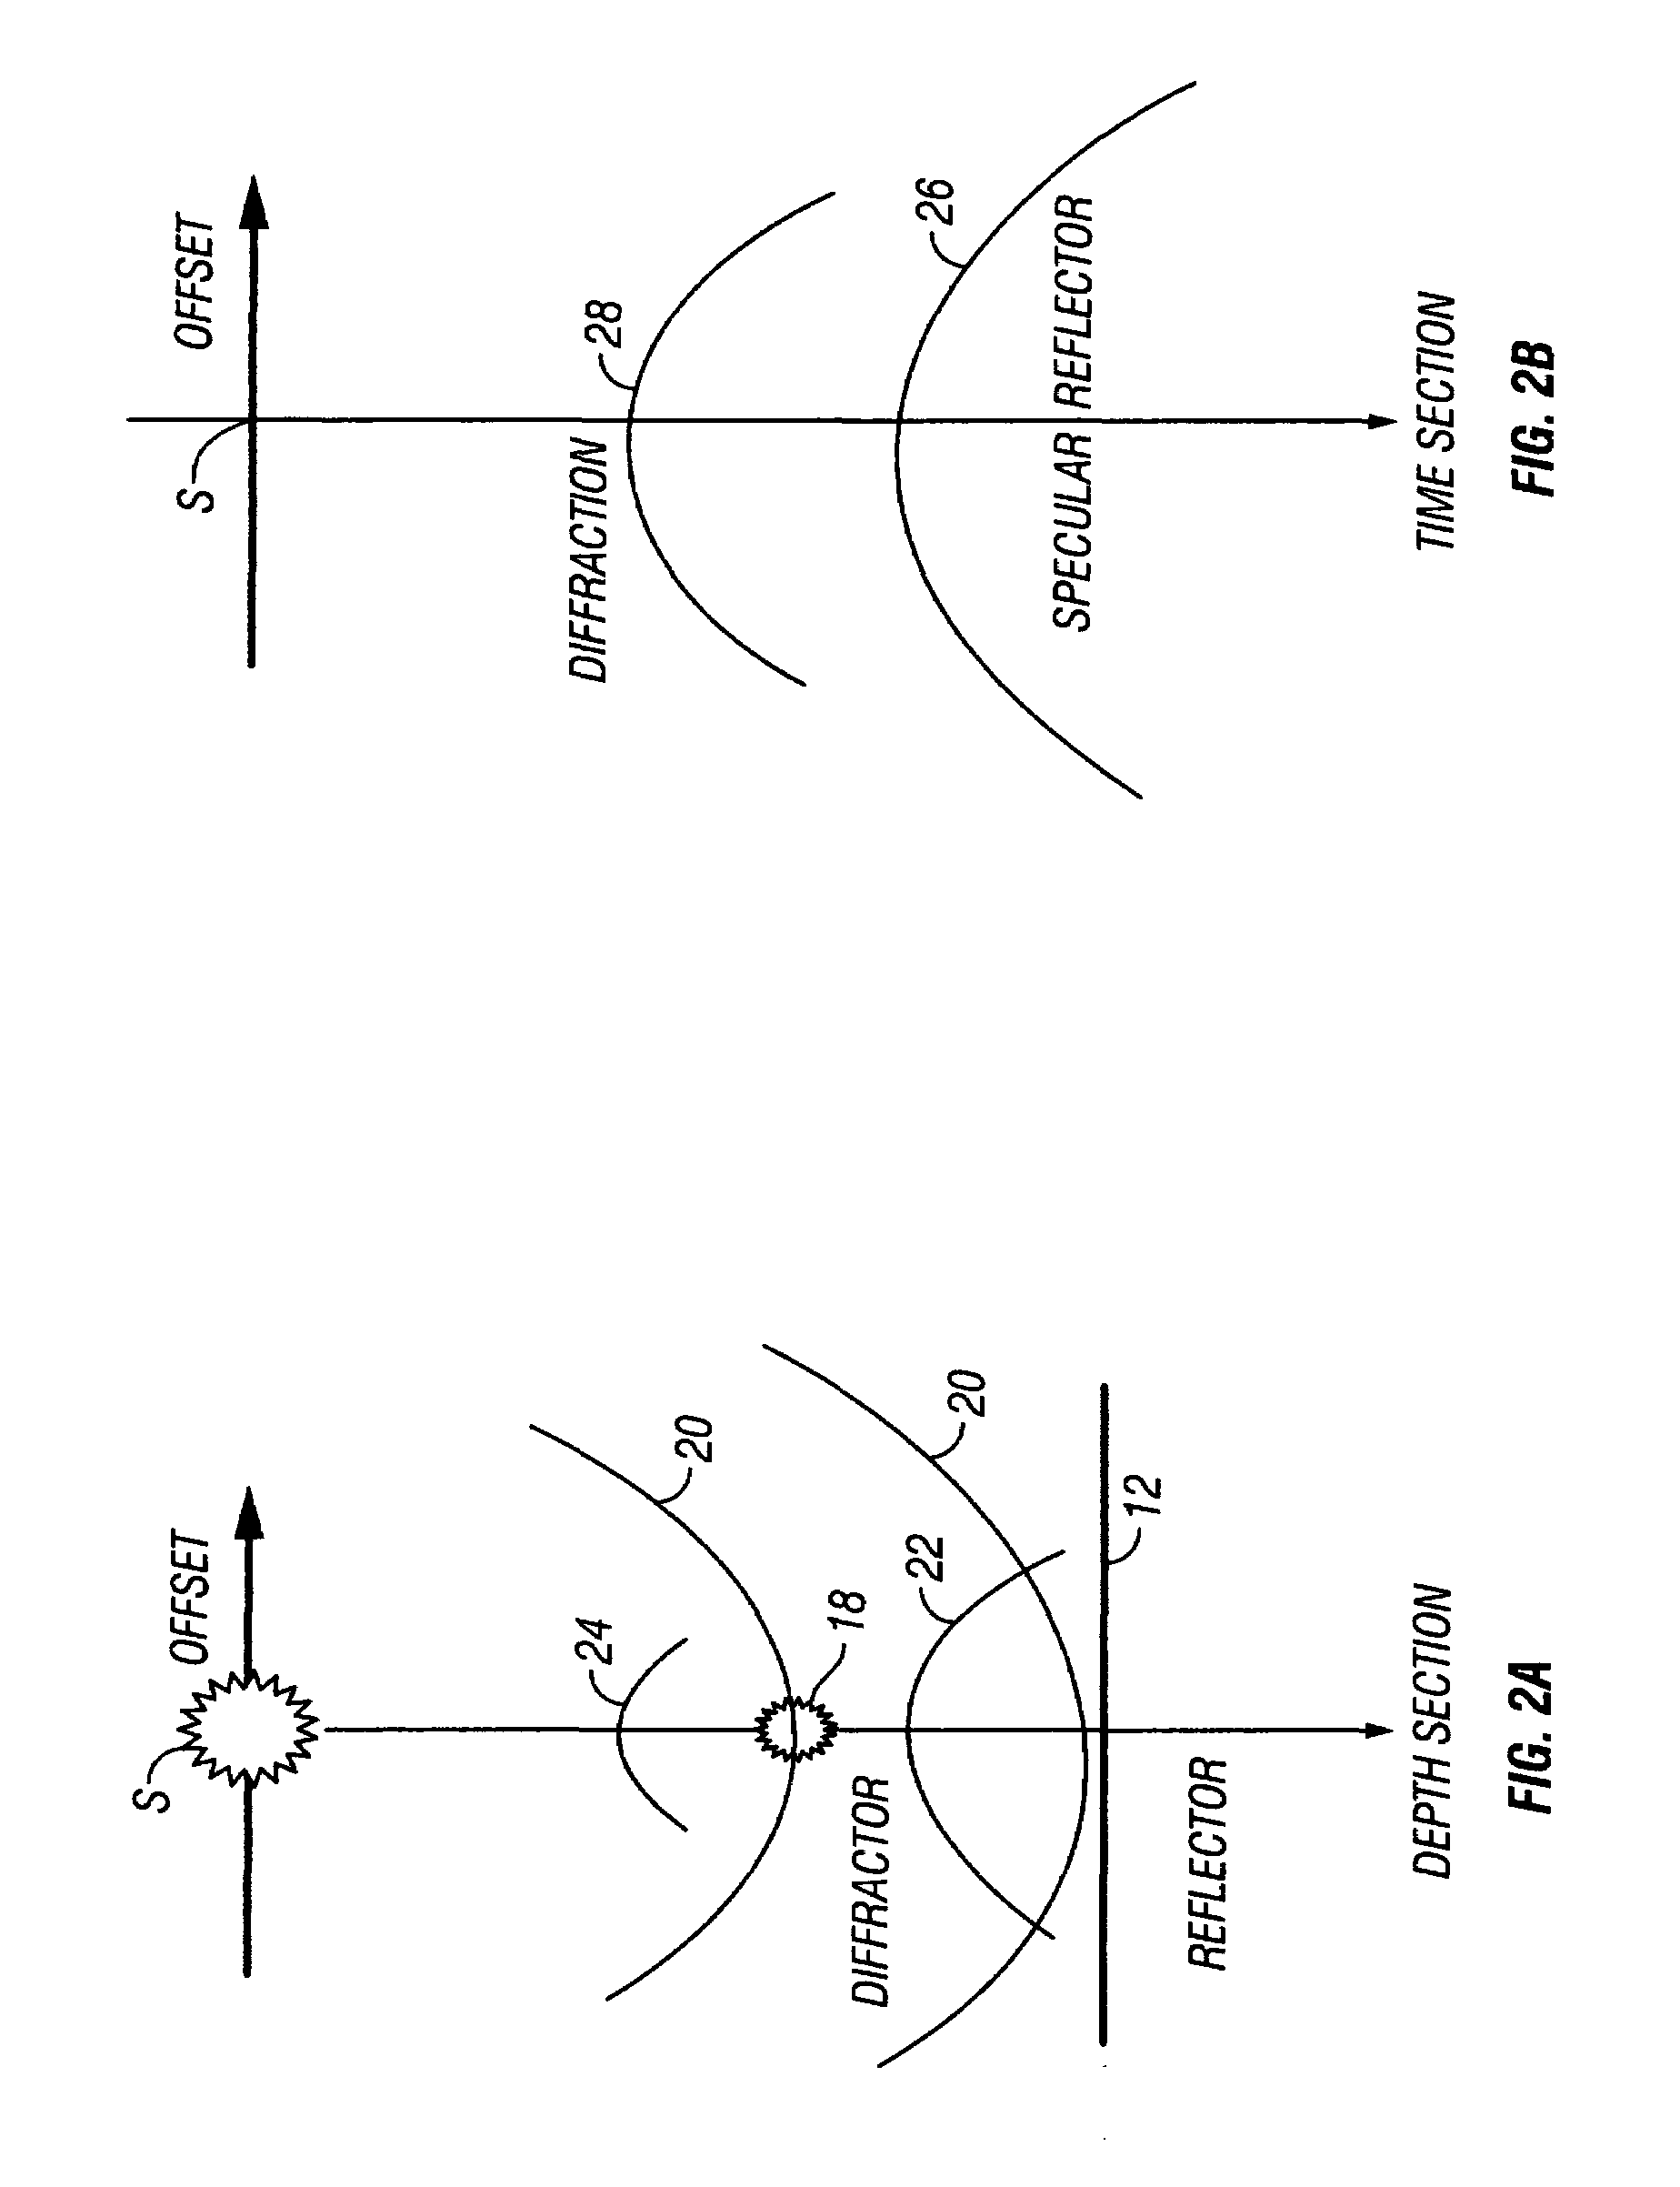 Method for detecting earth formation fractures by seismic imaging of diffractors